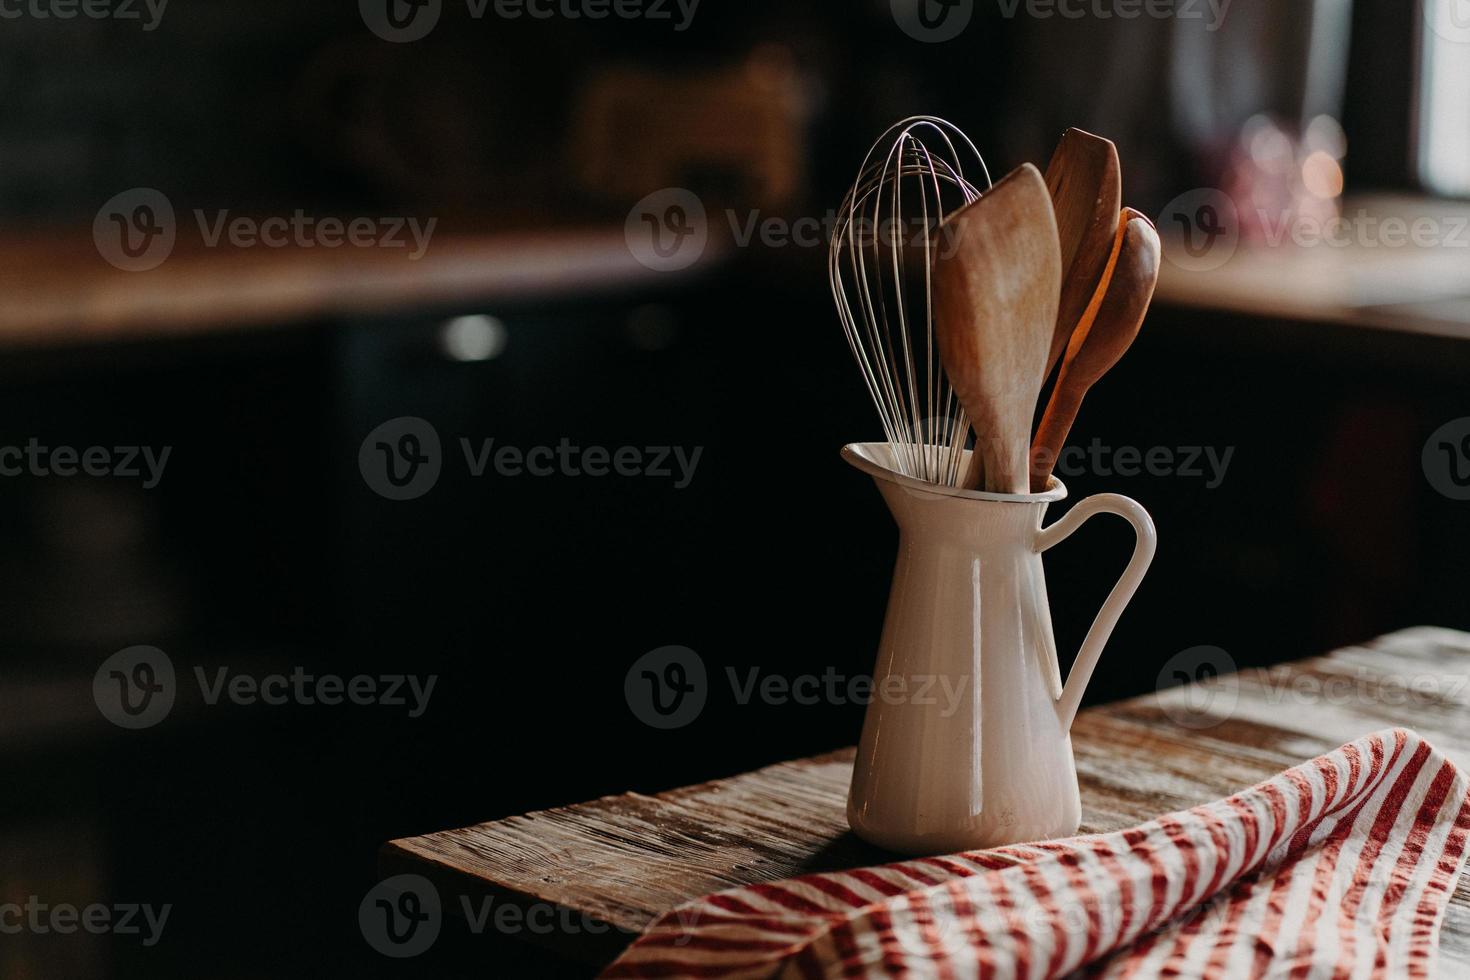 Kitchen accessories on wooden table. Utensils in white ceramic jar against dark background. Rustic style. Dishware for preparing meal. Wooden spoons shpatula and whisk photo